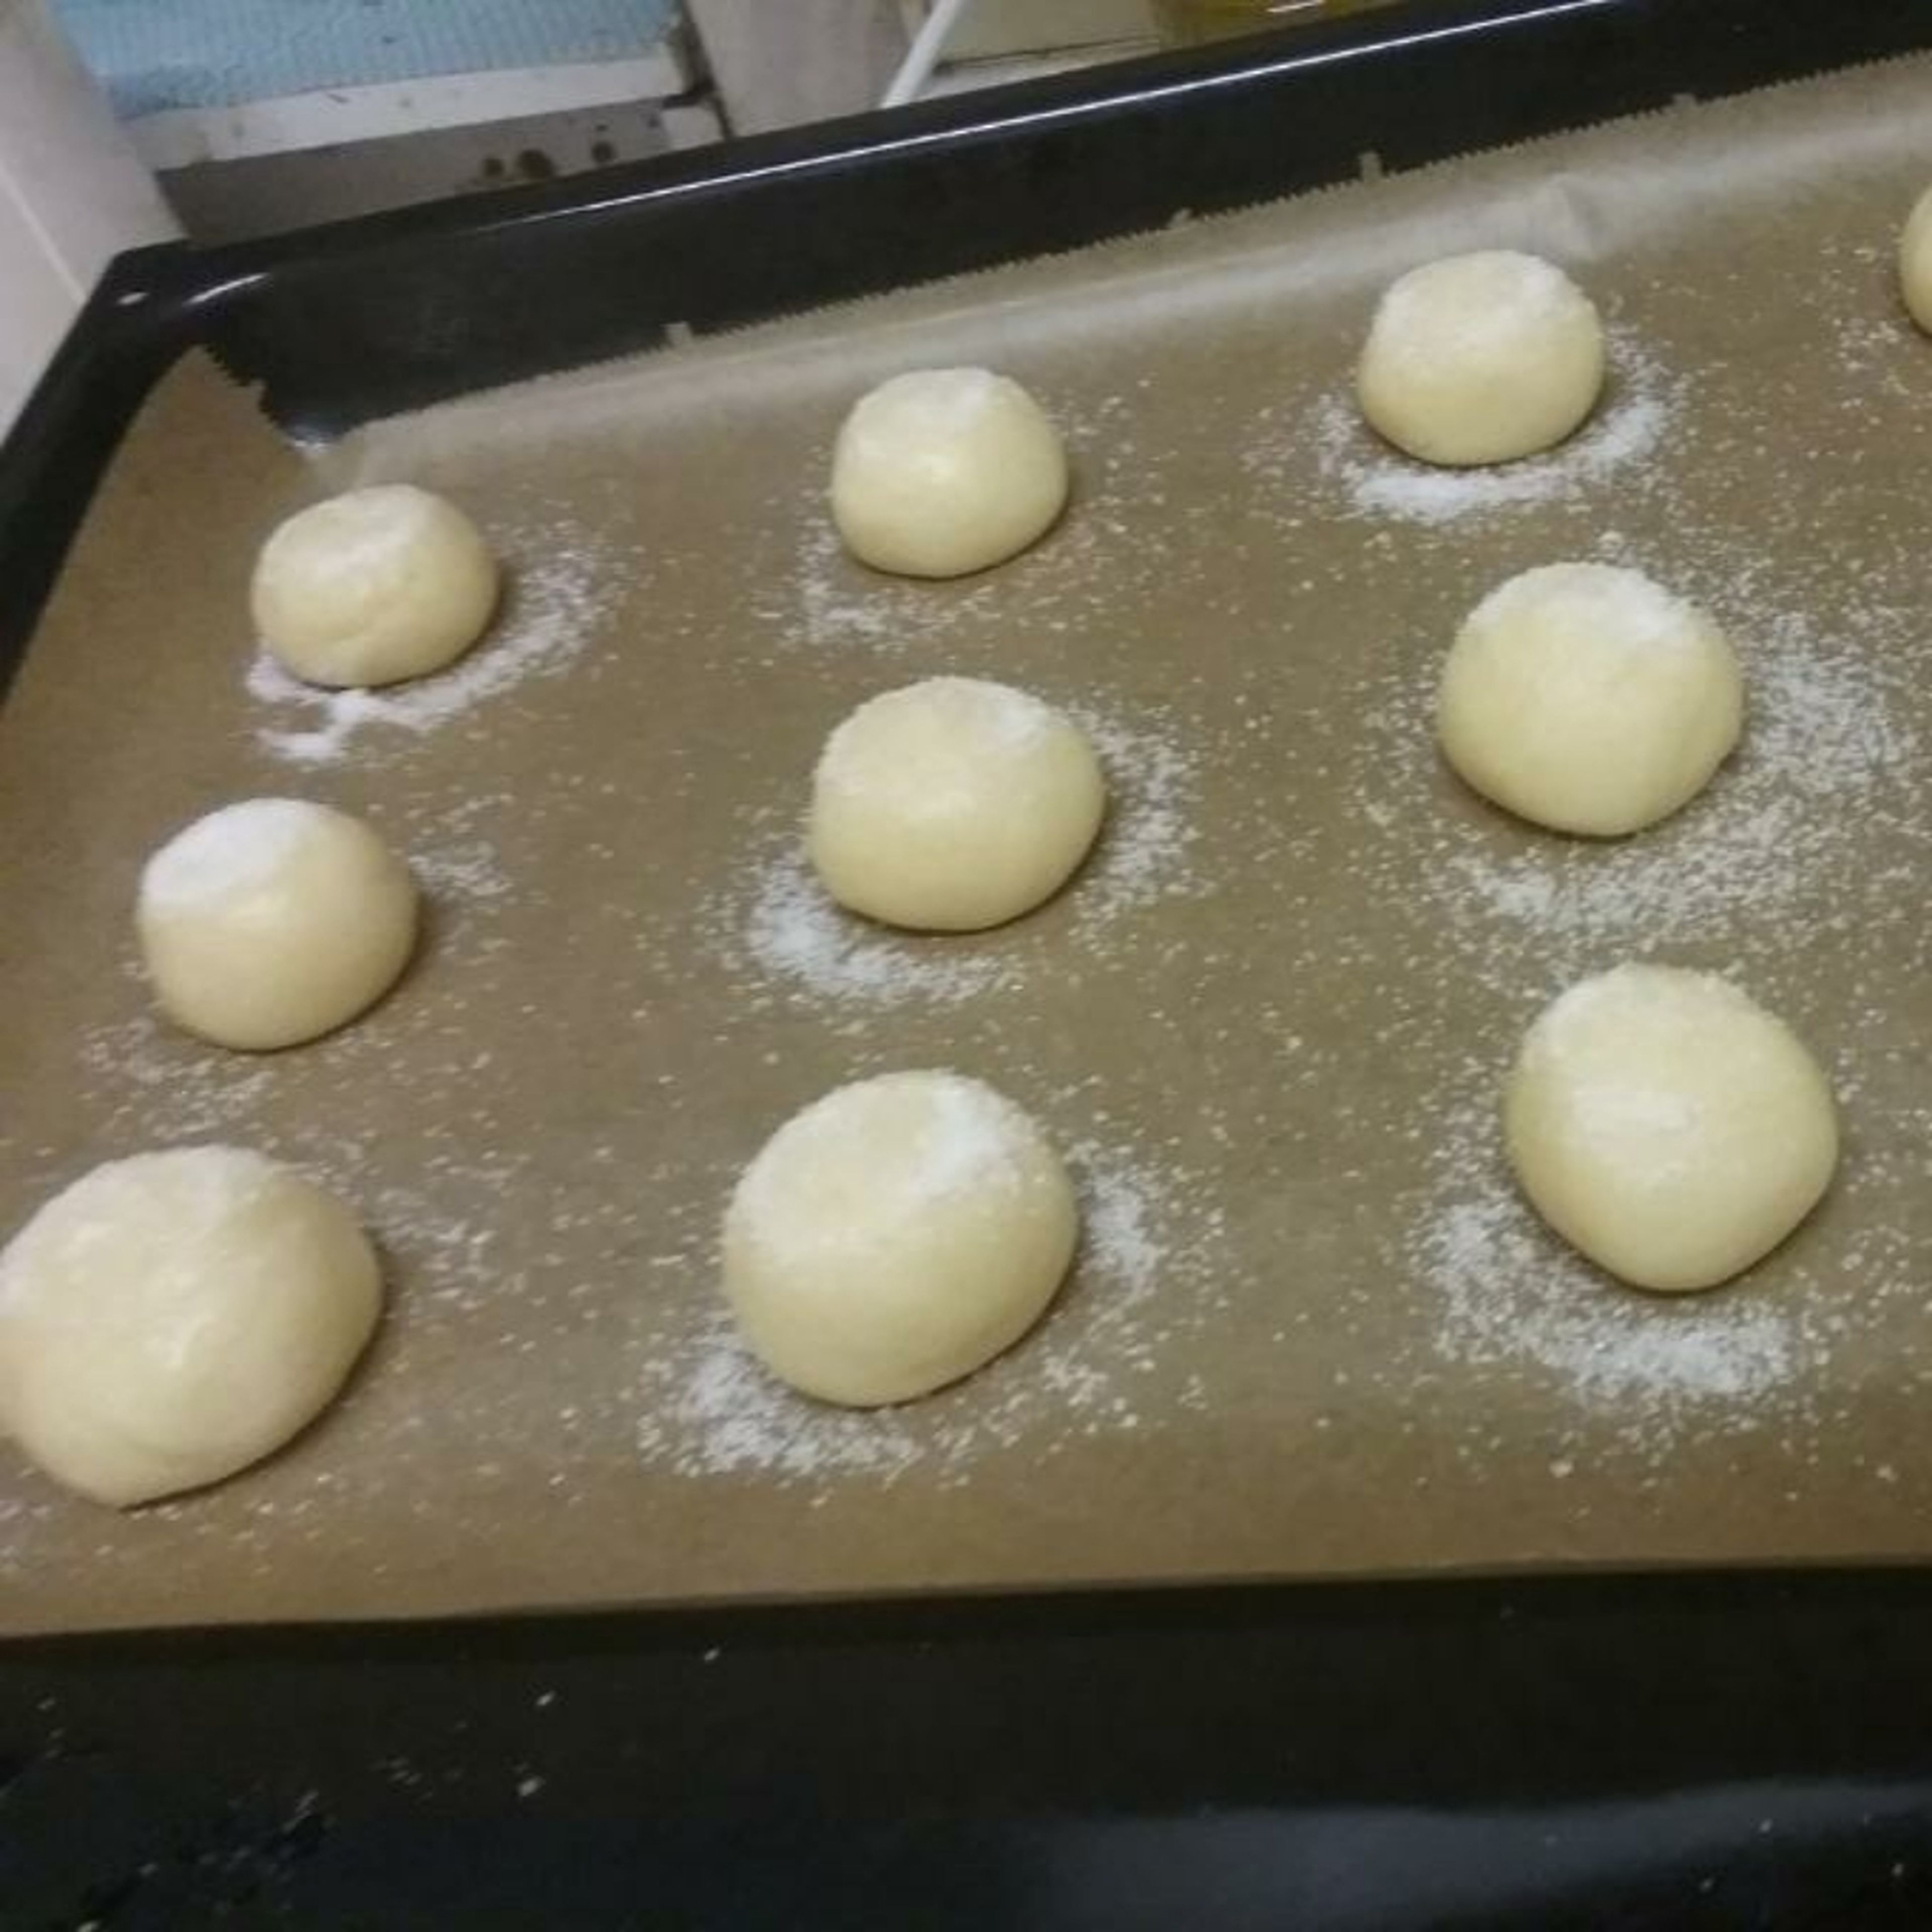 Take the finished batter and roll it into balls. Place it adjacently on the baking sheet, leaving 1 inch/3 centimetres between each ball. After that, sprinkle sugar generously on top of the balls.